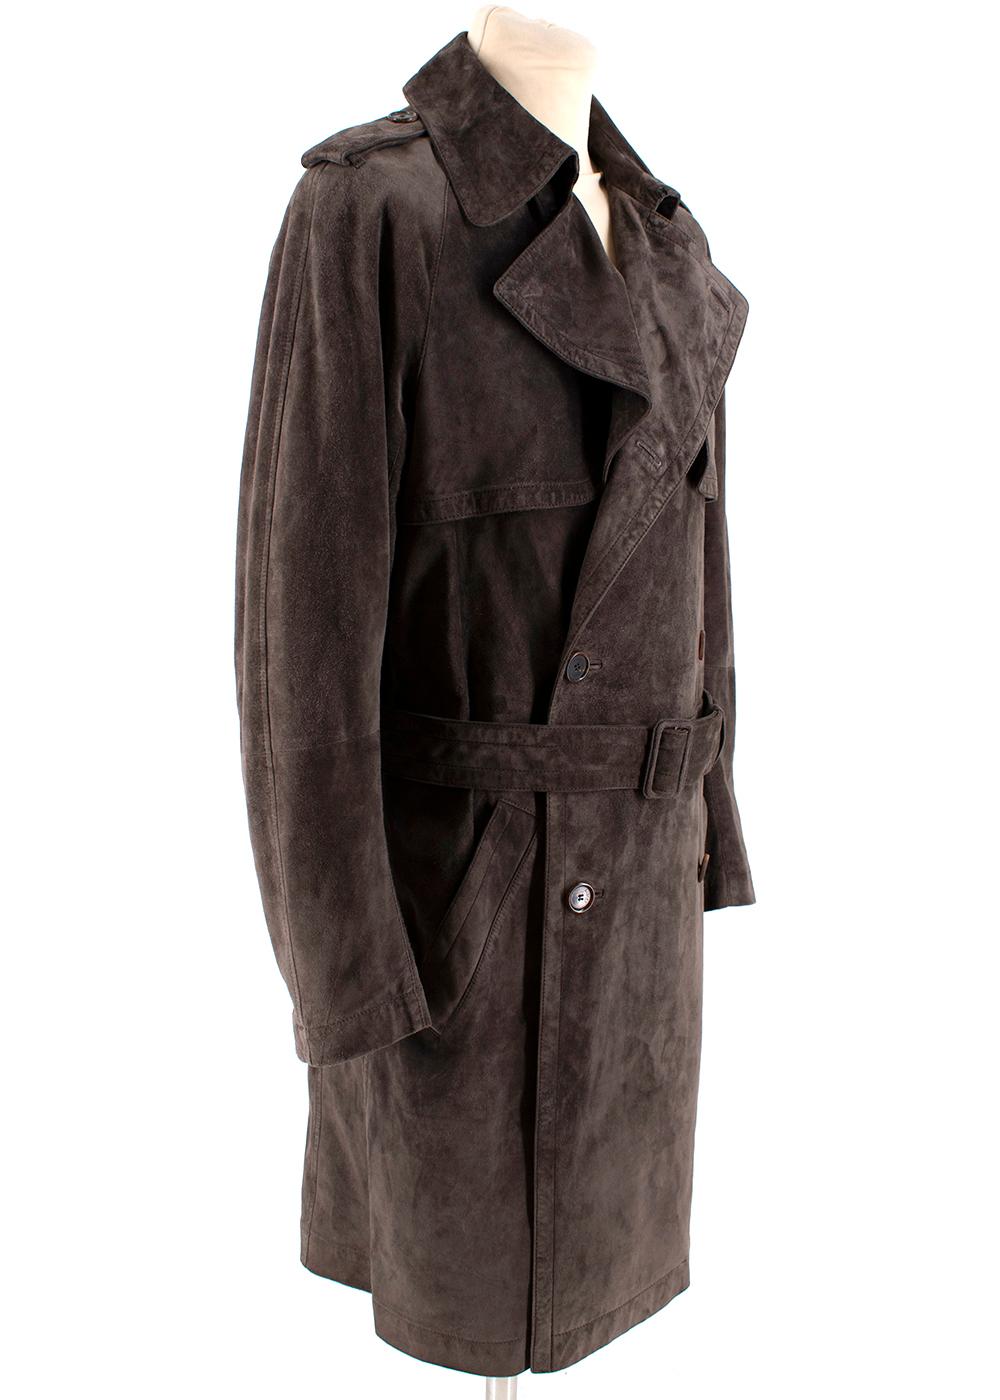 Asprey London Brown Trench Coat Mens

- IT 48
- Silver hook chain hardware
- Belted at the waist
- Tortoise shell buttons on the shoulders
- Relaxed look
- Brown soft suede outer-shell 
- Leather brown lining 
- Trans-seasonal design 

Please note,